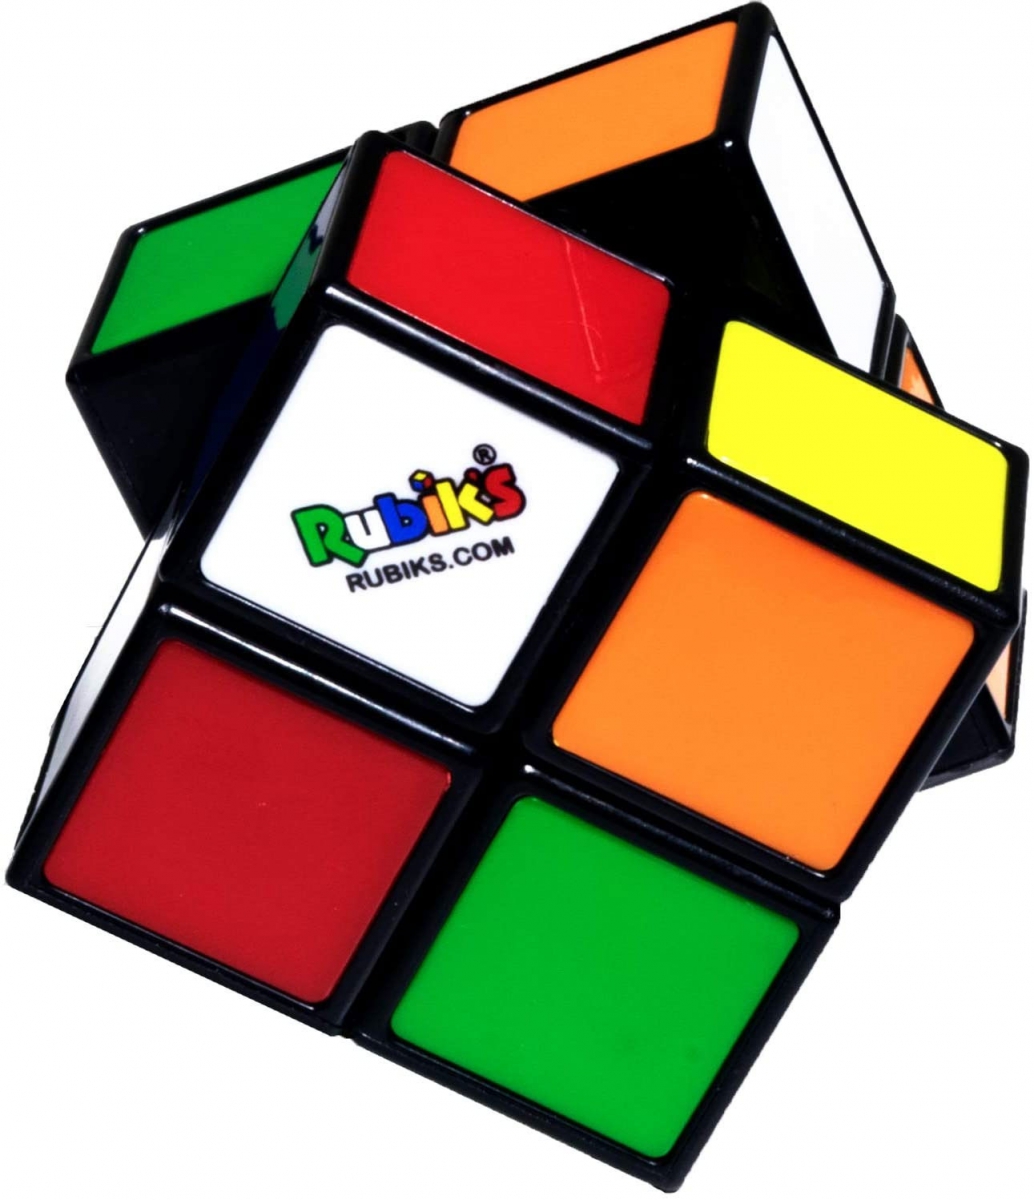 Rubiks Cube 2X2 New Design - Spel & Sånt: The video game store with the ...